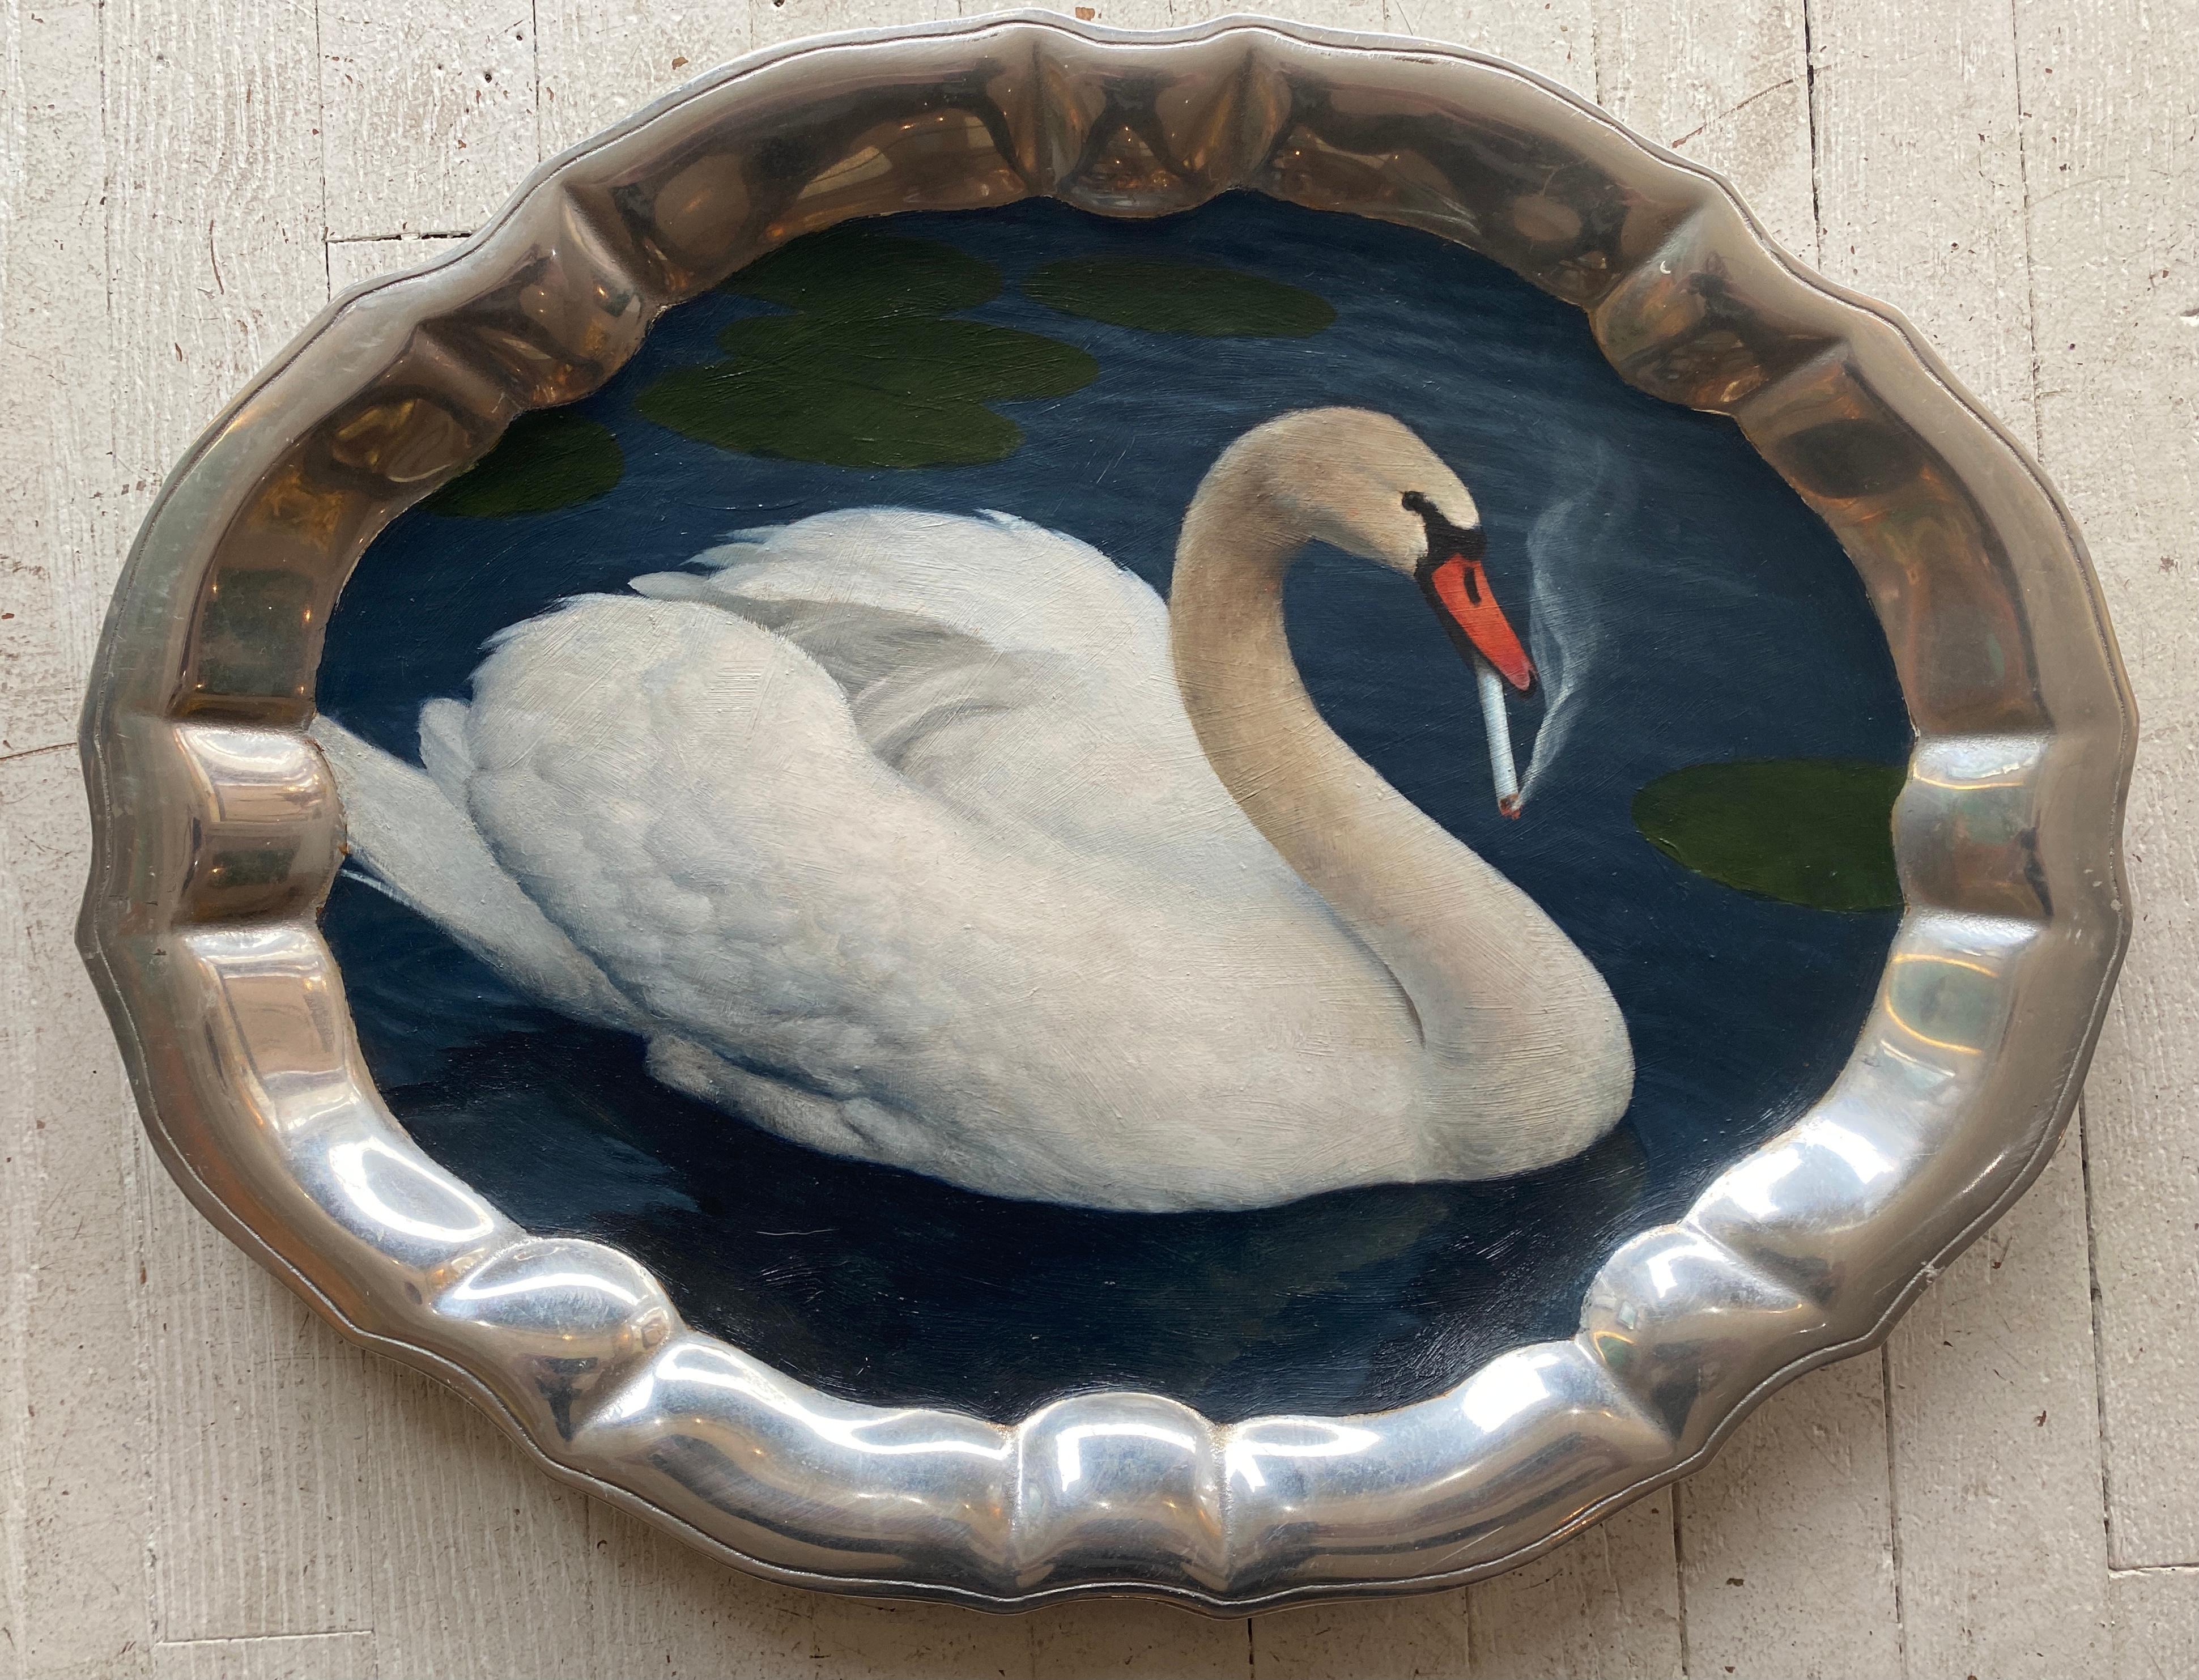 "Relapse" - contemporary oil painting on found object, humorous swan smoking cig